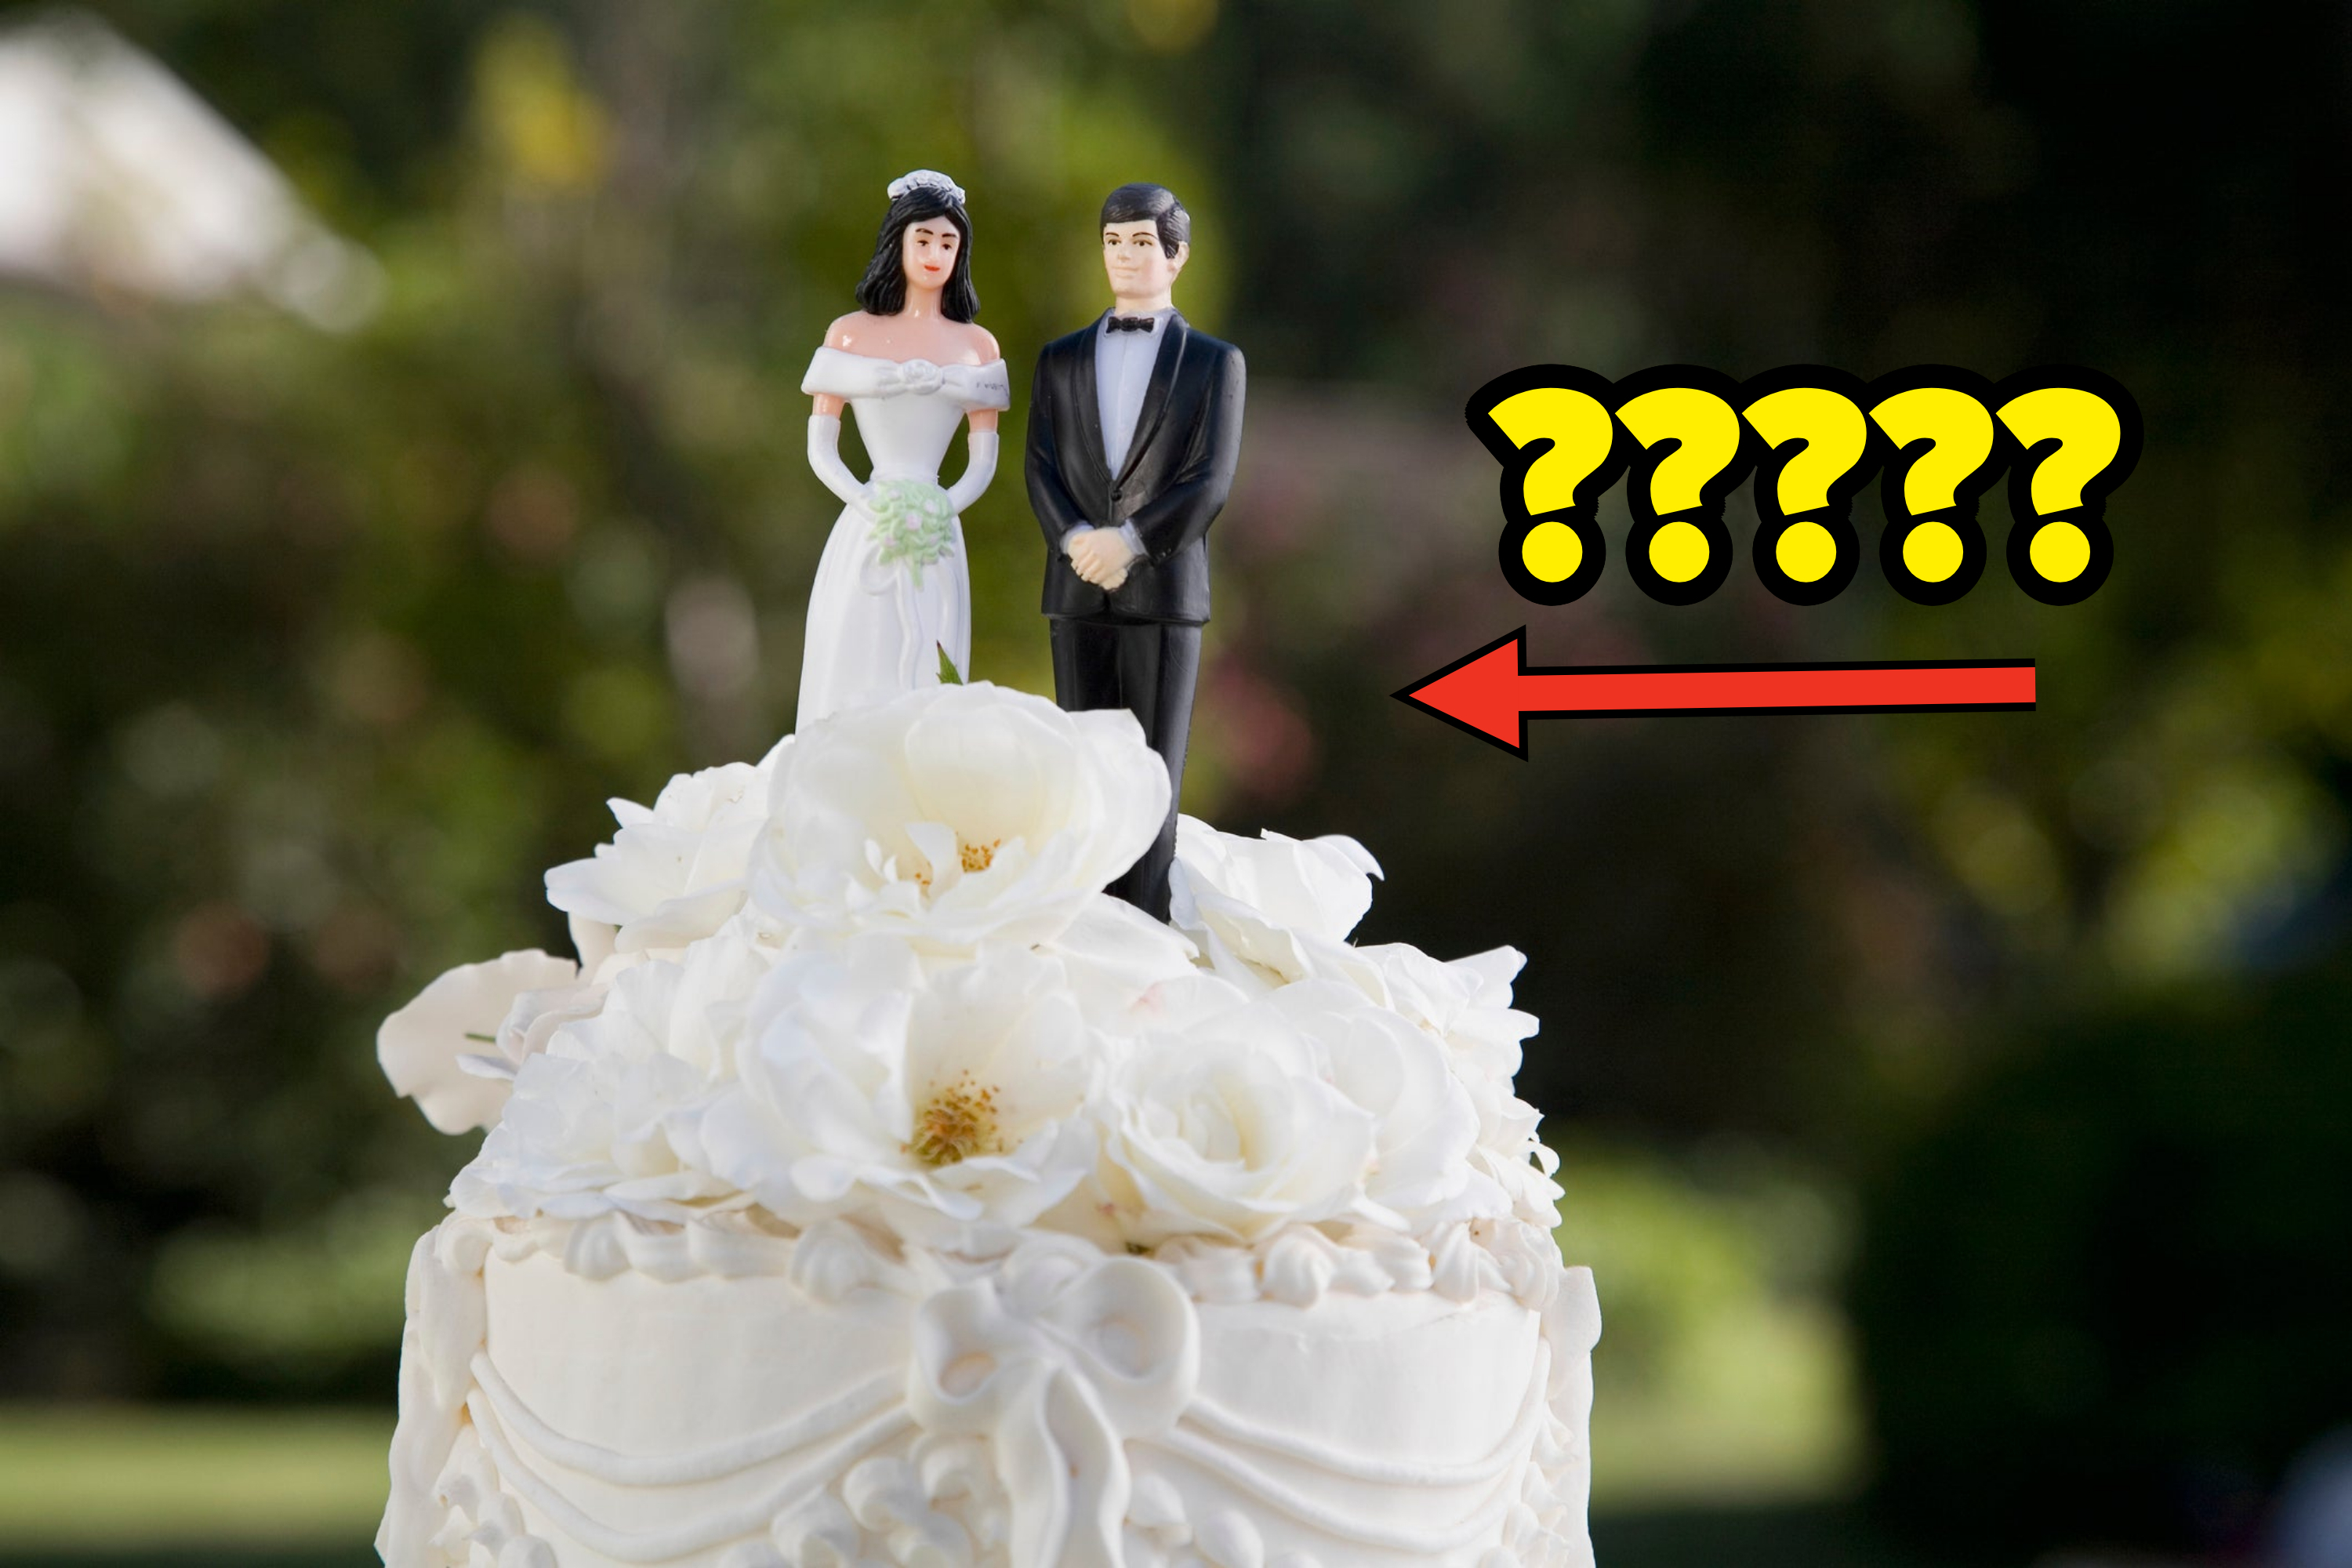 Questions marks with an arrow pointing to a wedding cake